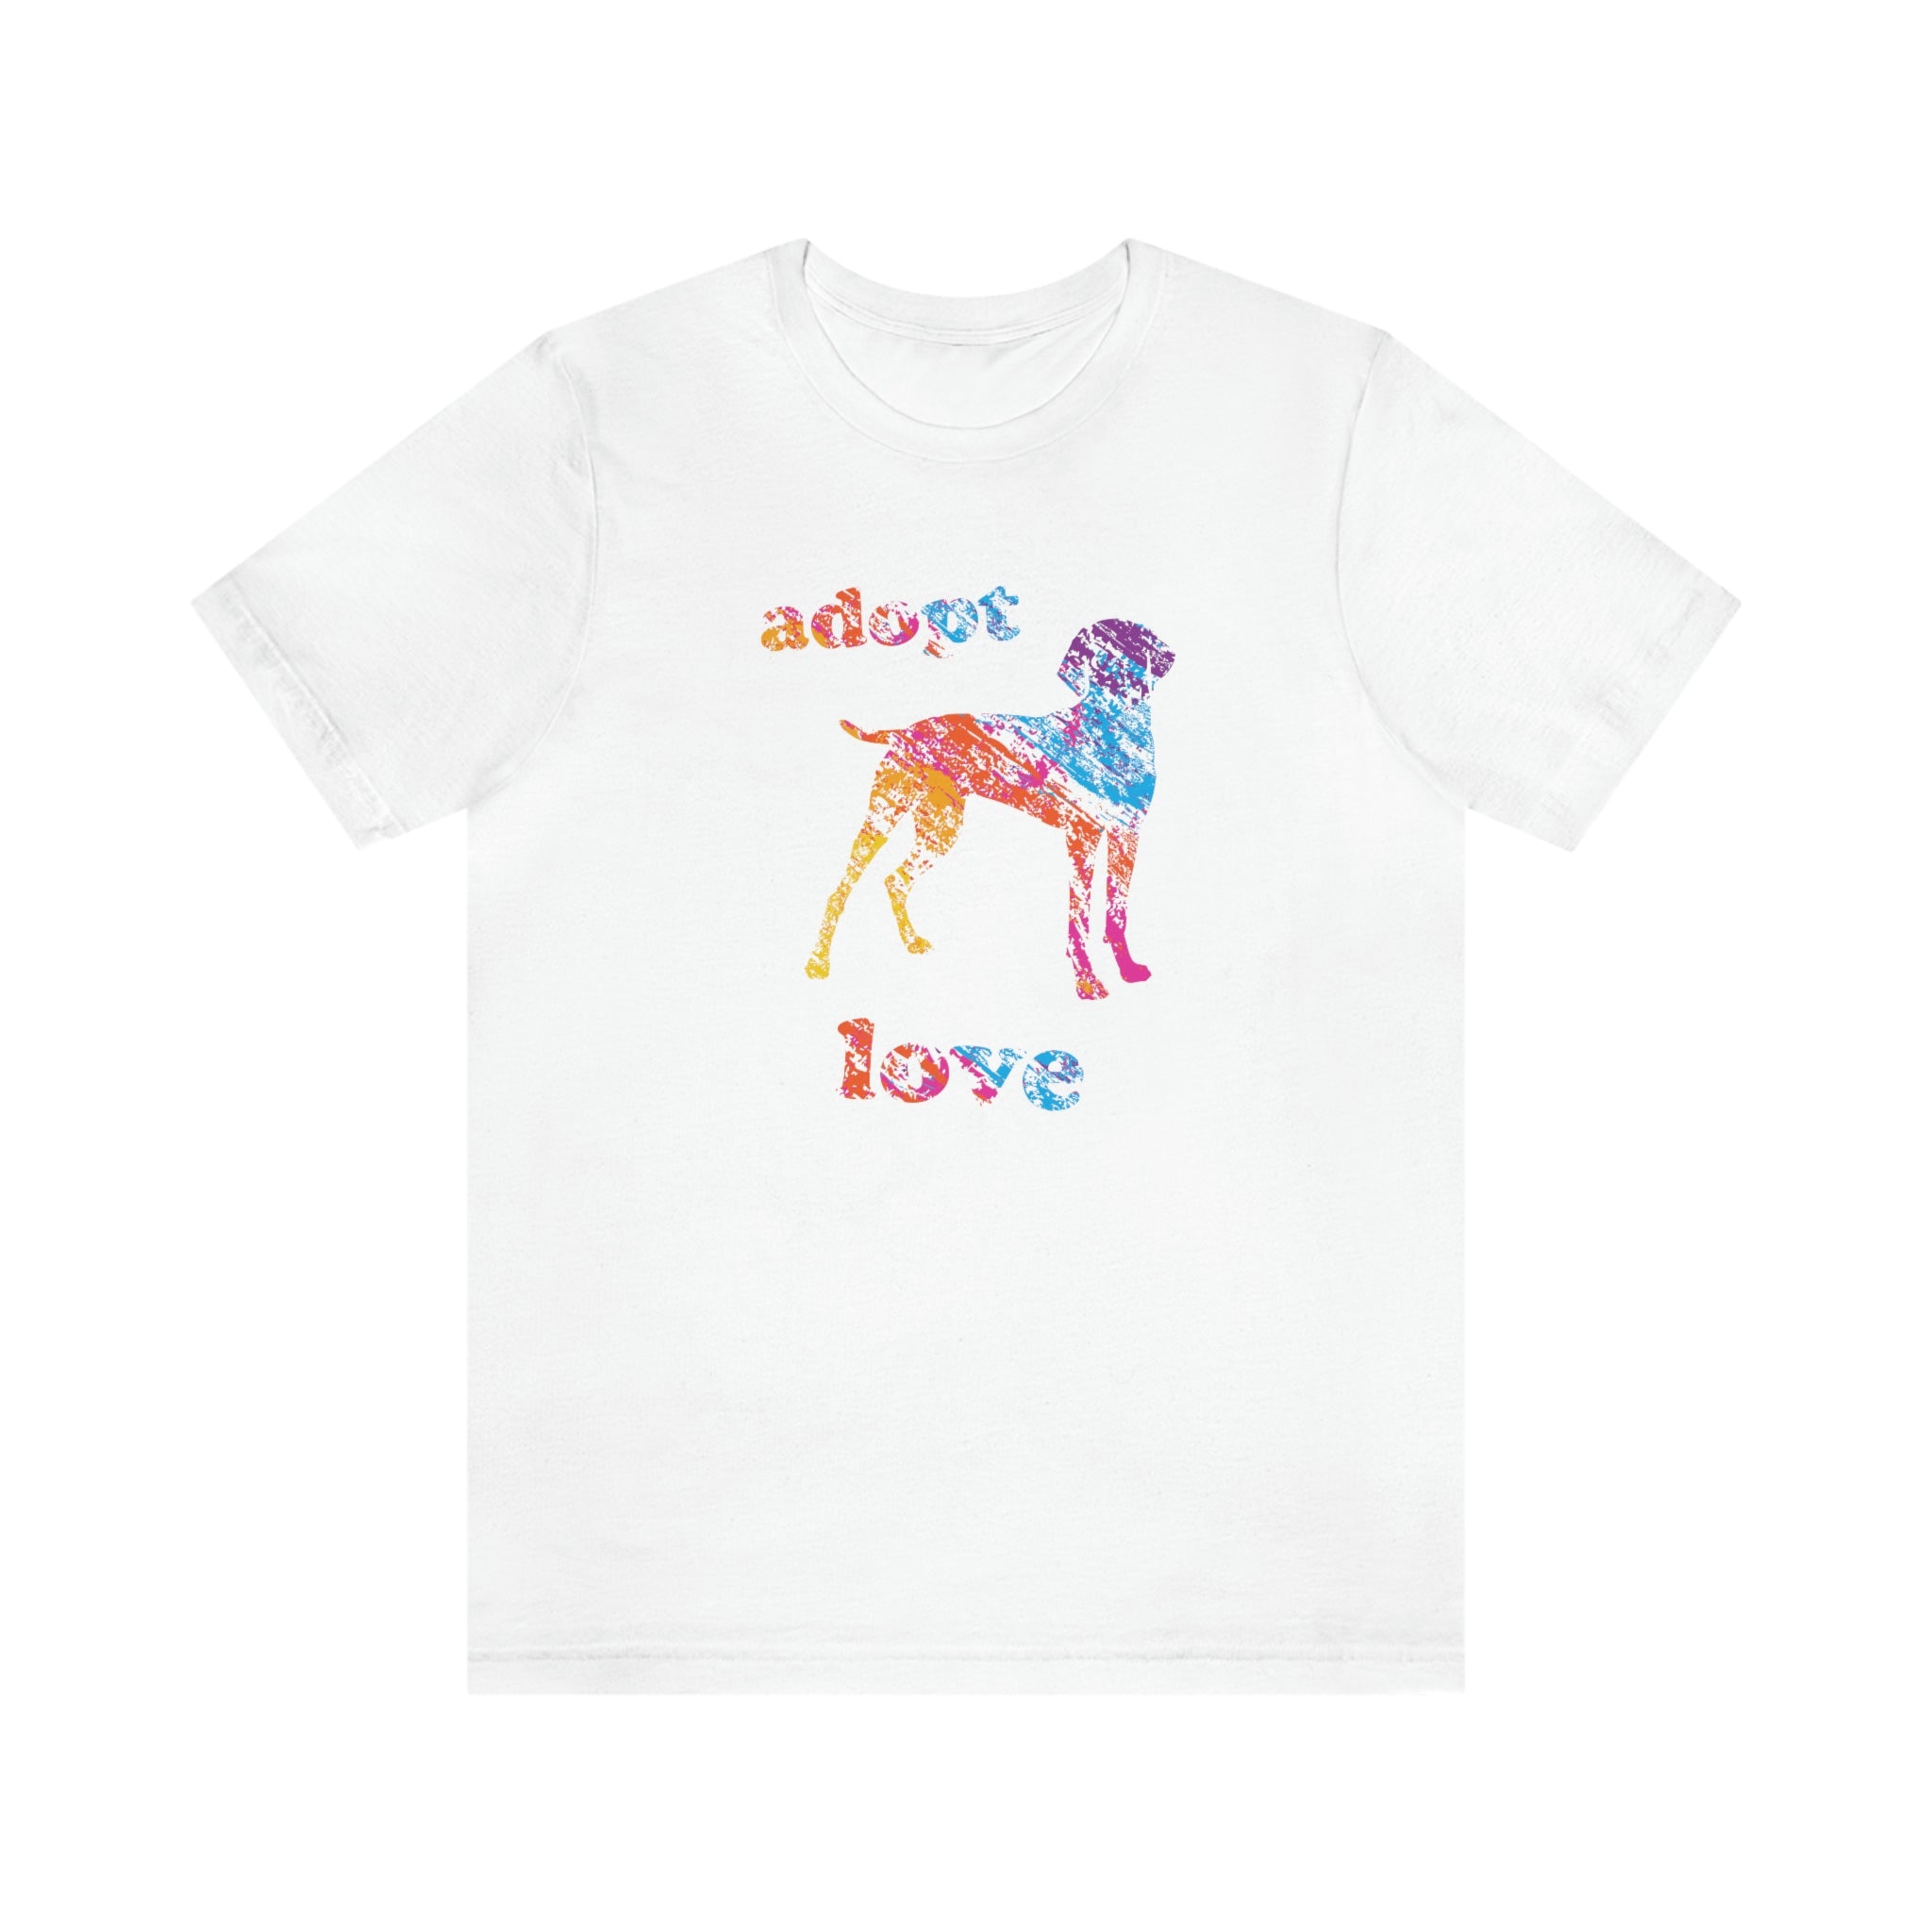 Adopt Love - Dog with Colour Lettering :  Unisex 100% Cotton T-Shirt Supporting Humane Animal Shelters